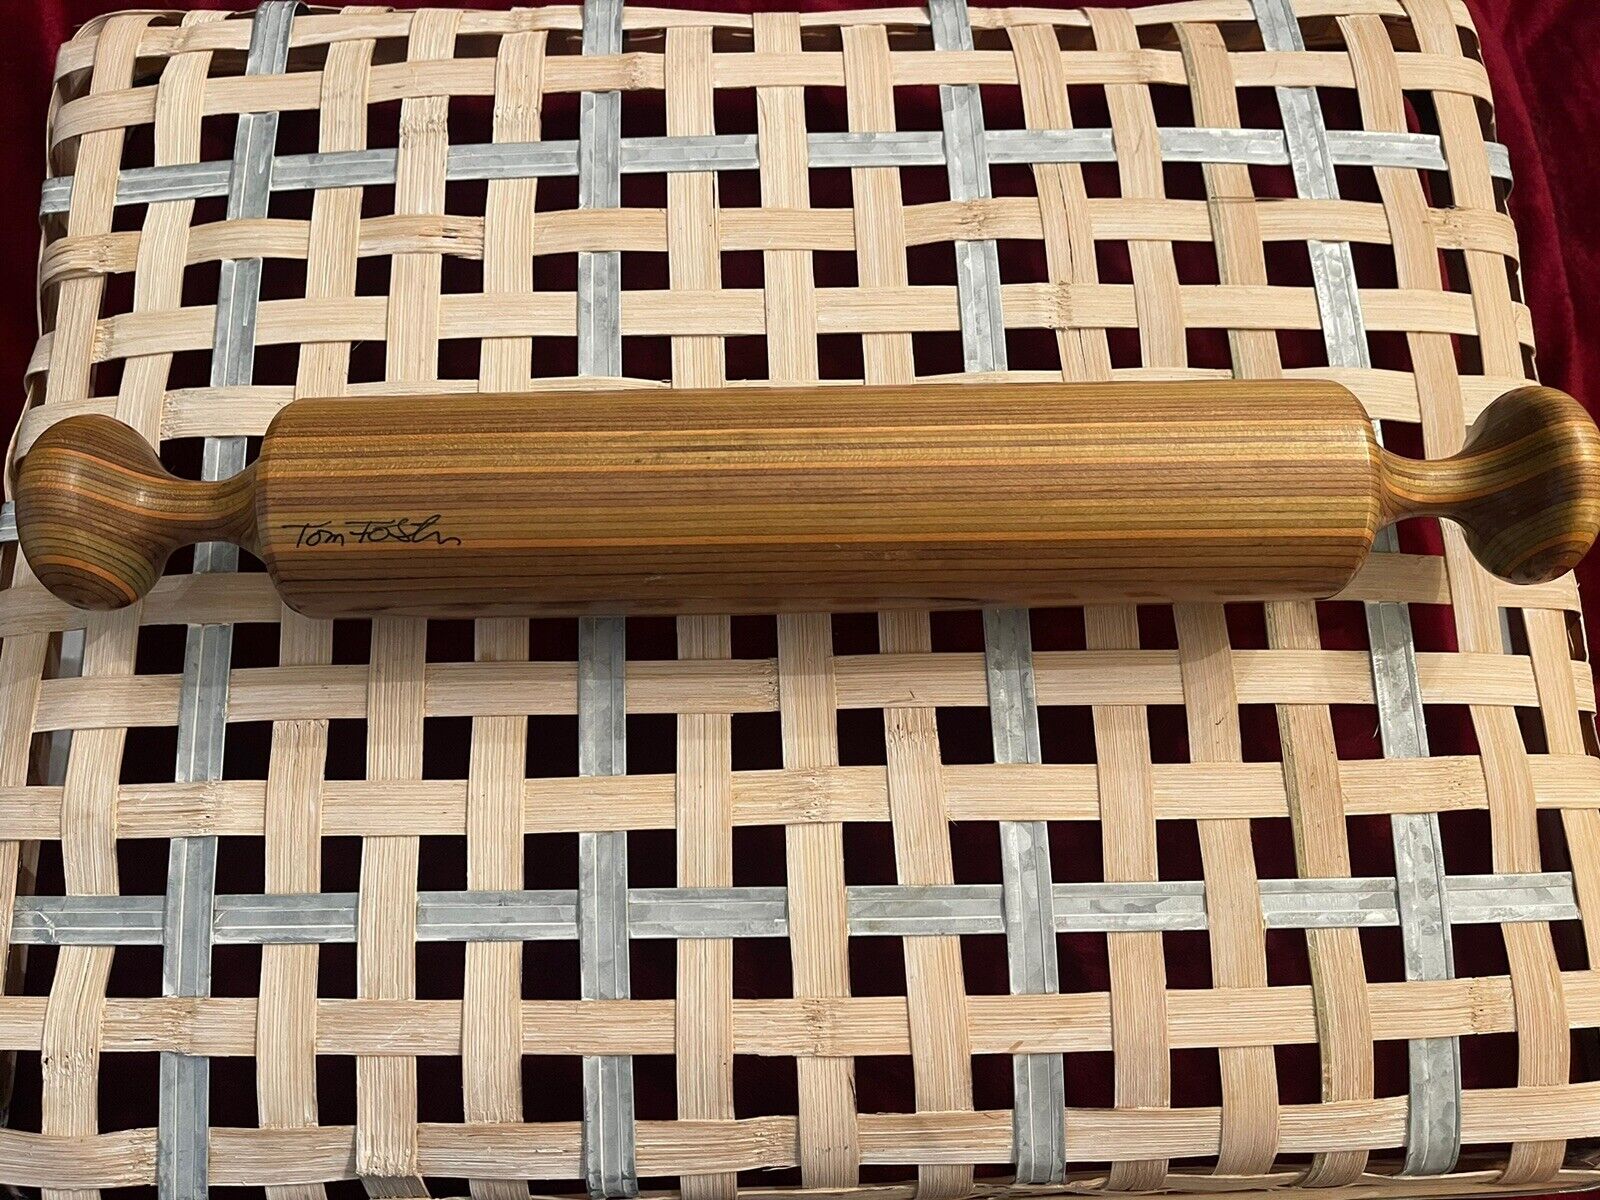 Hand Turned Multicolored Wood Signed Tom Foster 15.5 Inch Rolling Pin